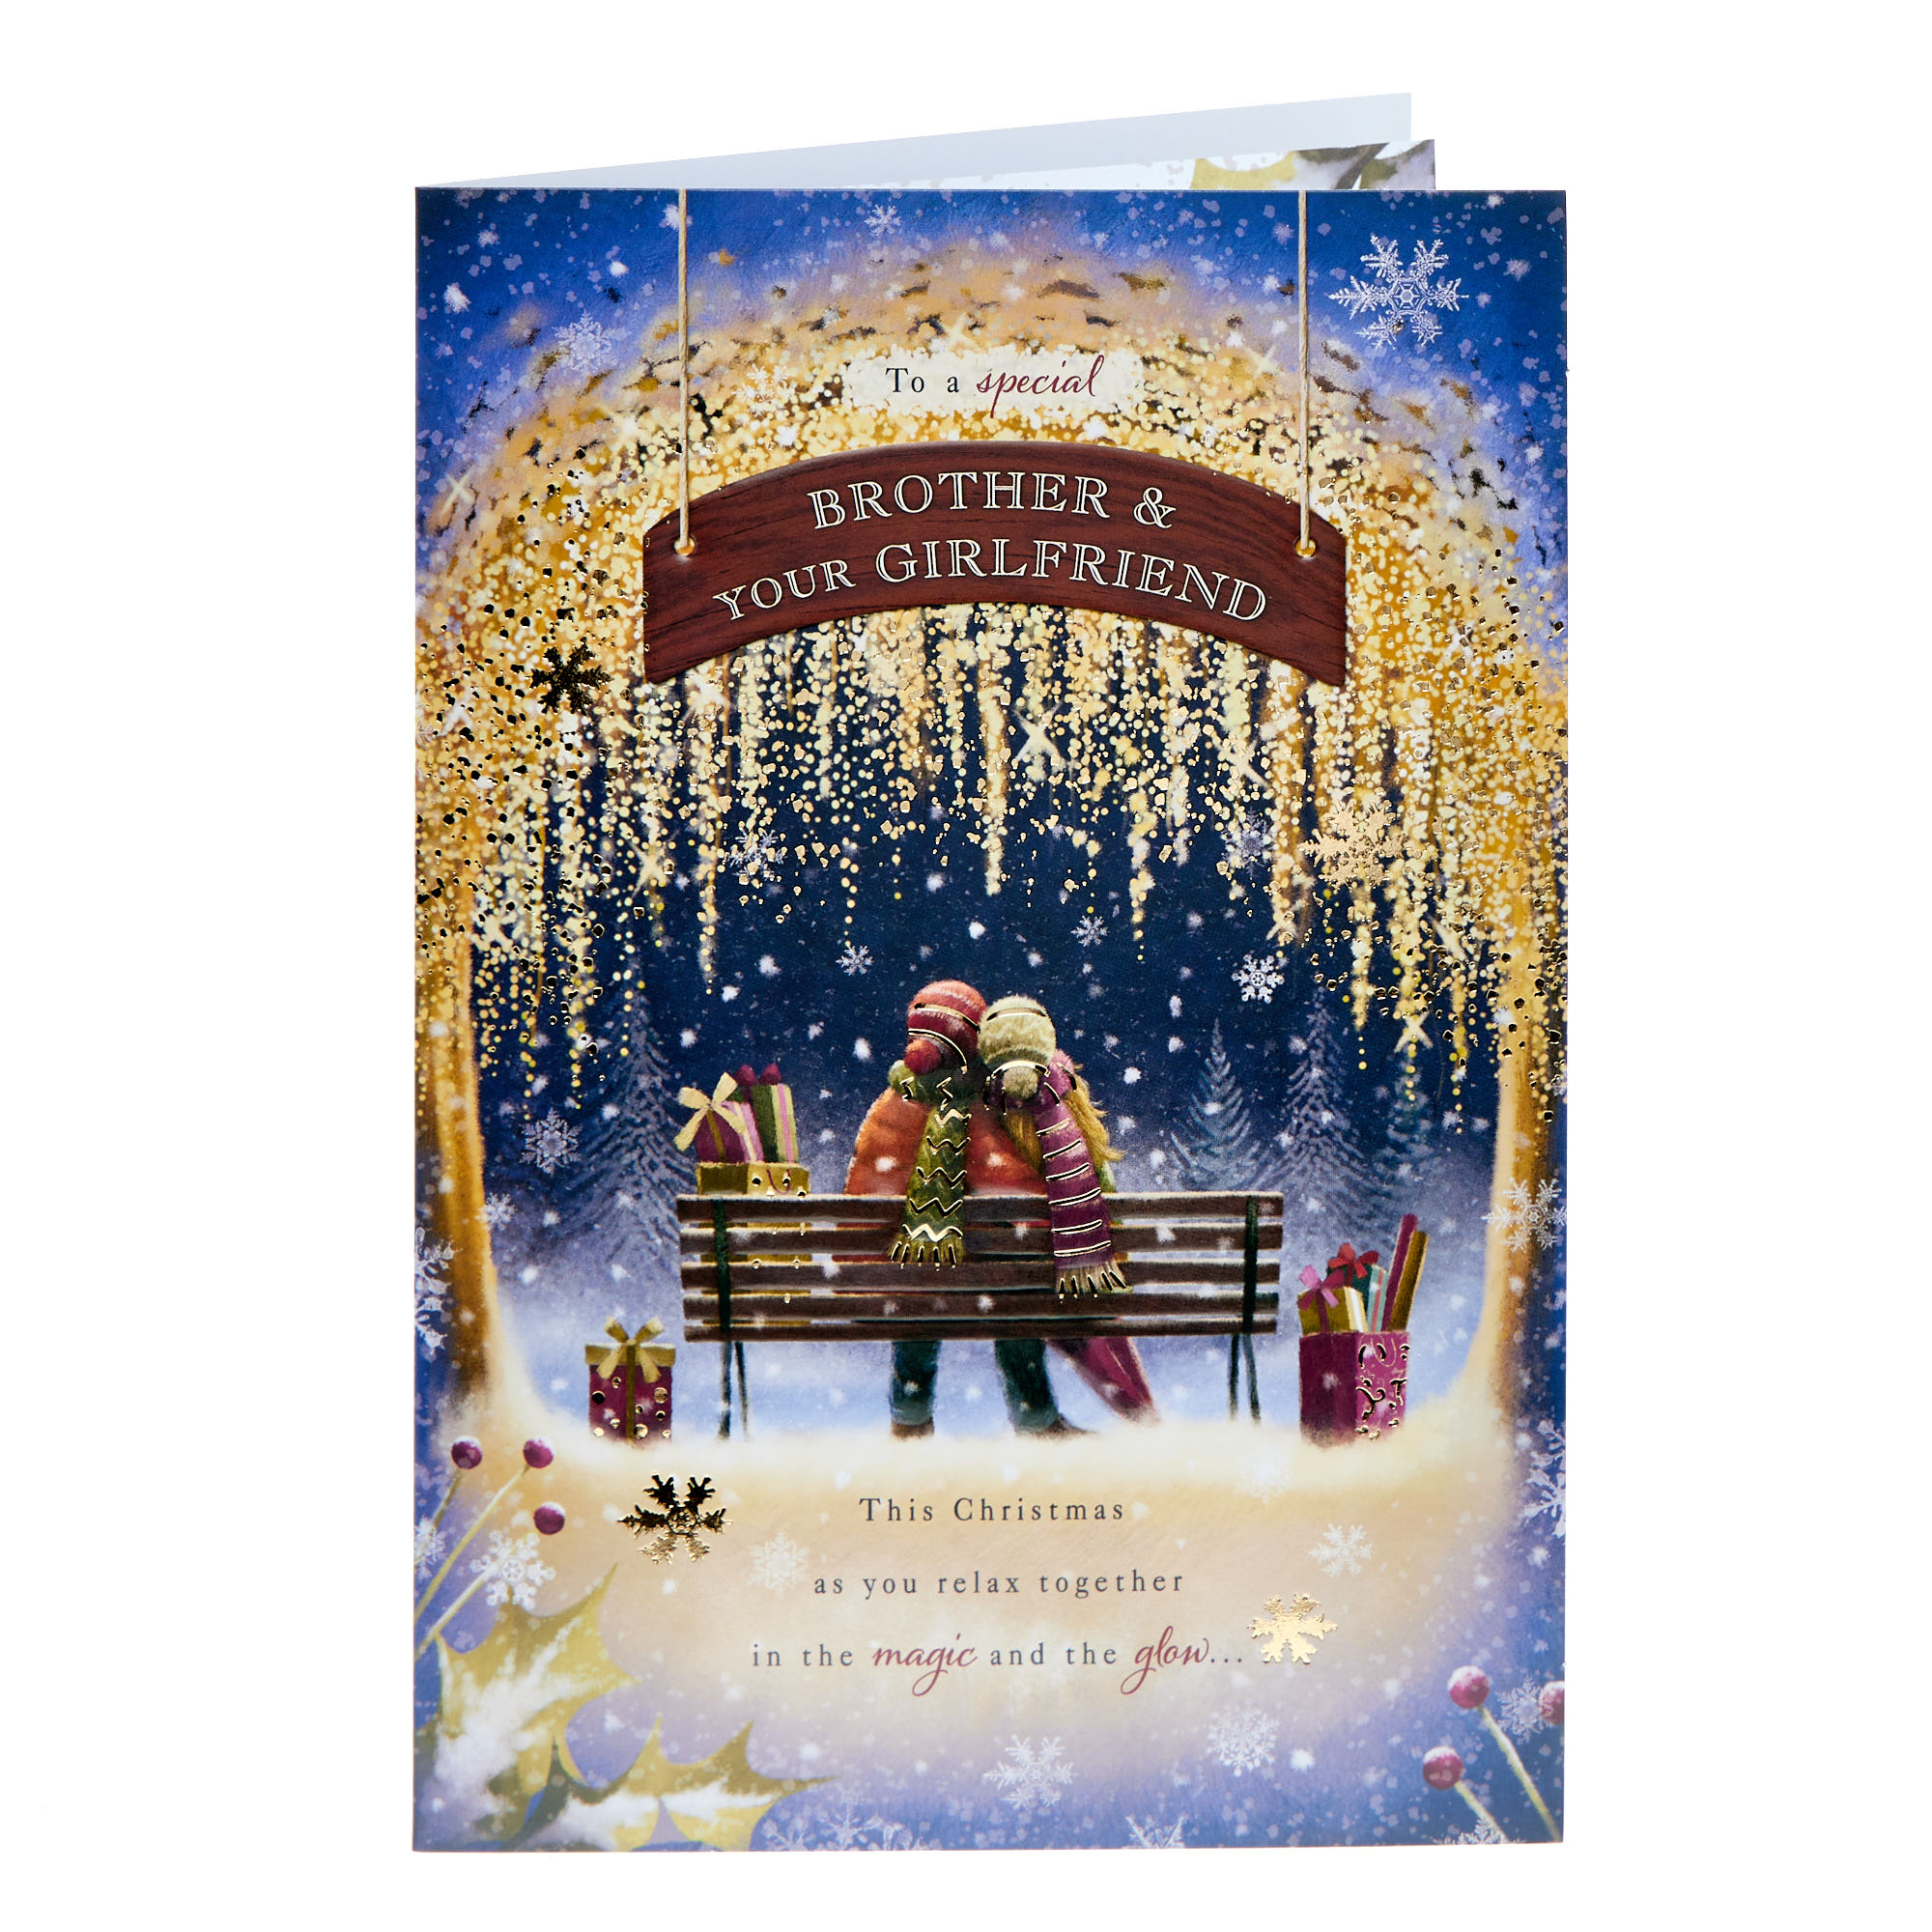 Brother & Girlfriend Bench Christmas Card